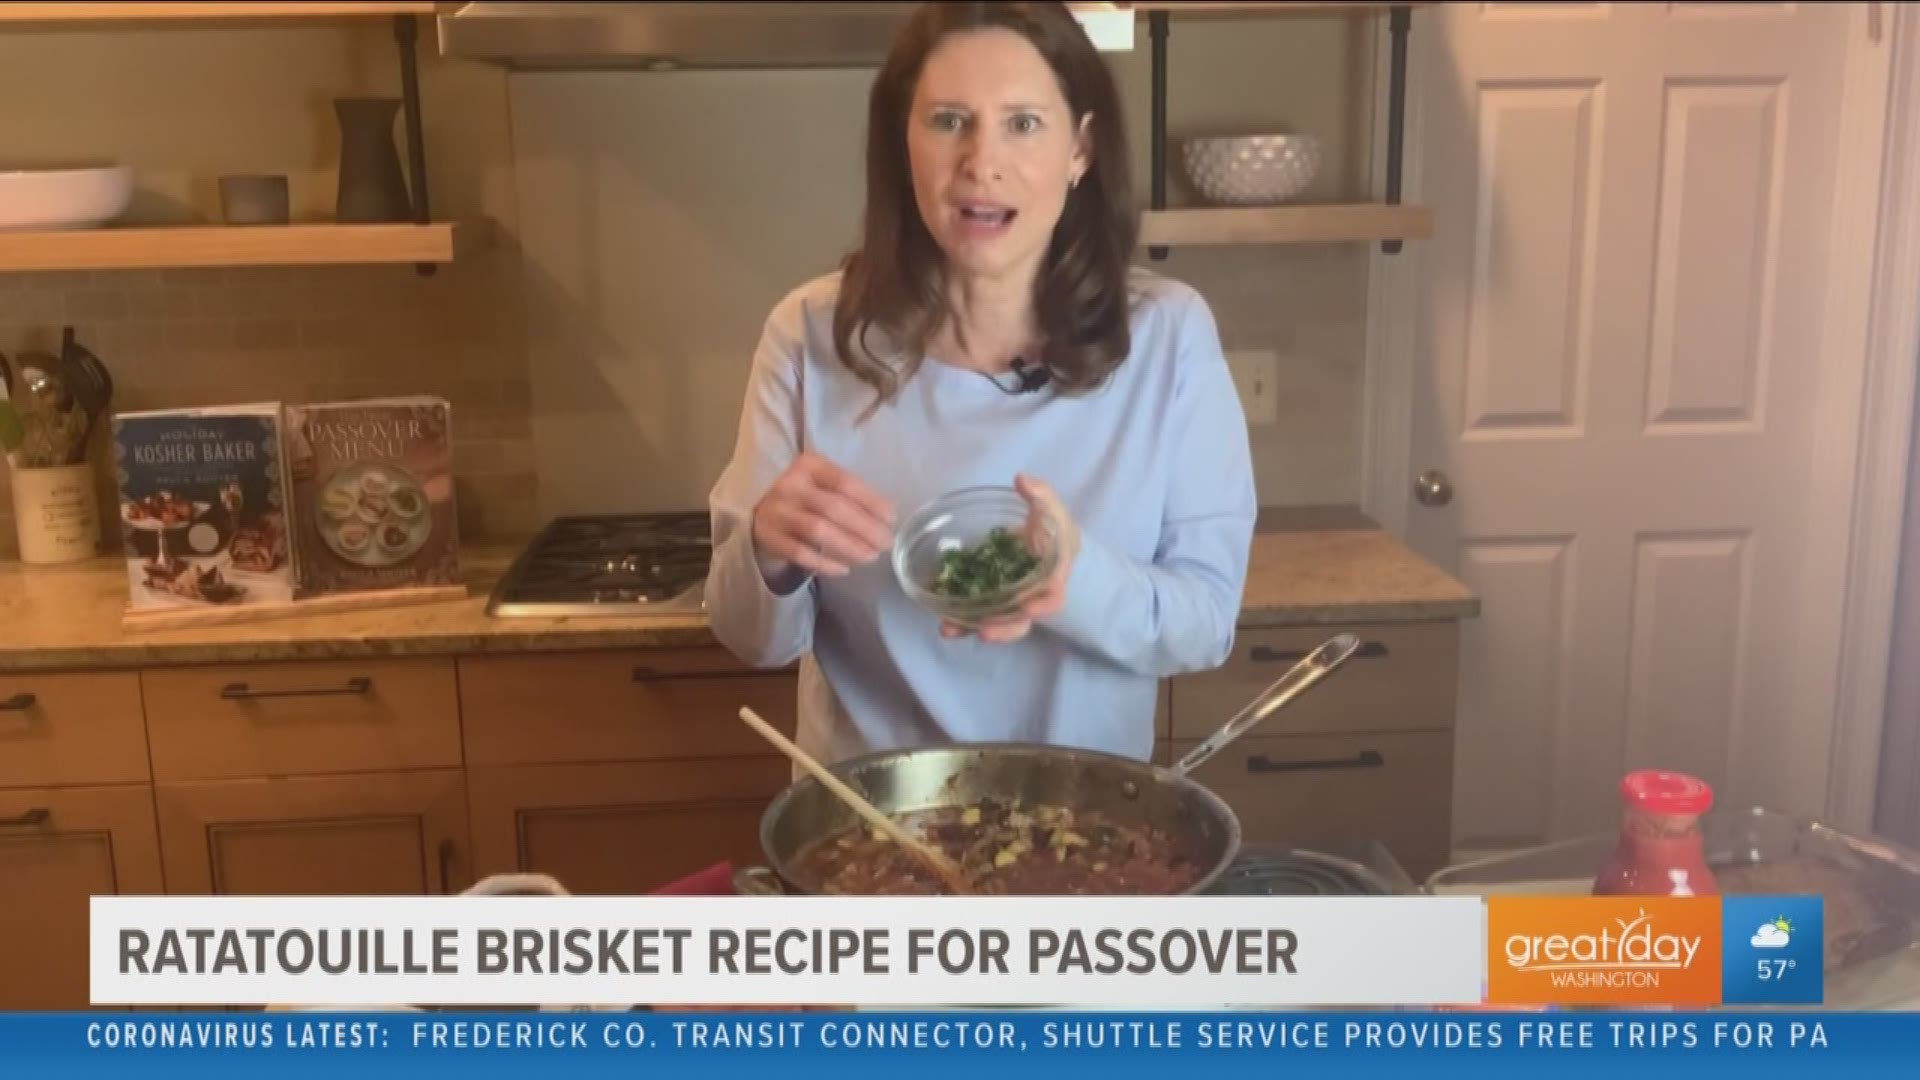 Cookbook author, Paula Shoyer, shares her brisket ratatouille recipe, just in time for Passover.